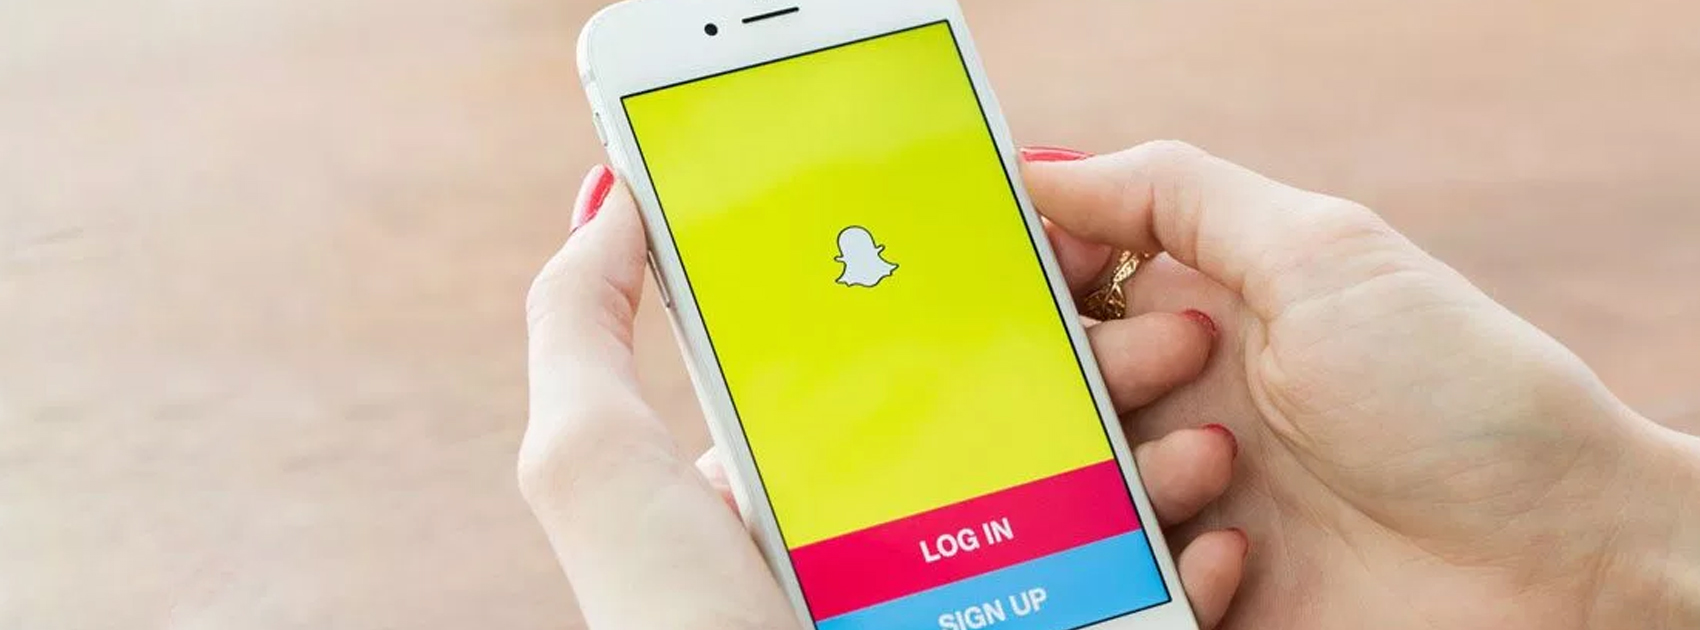 Snapchat Facts,Startup Stories,Interesting Facts 2019,snapchat facts 2019,5 Awesome Snapchat Facts,interesting facts about Snapchat,Cool Facts About Snapchat,Snapchat Latest News,Snapchat Unknown Facts